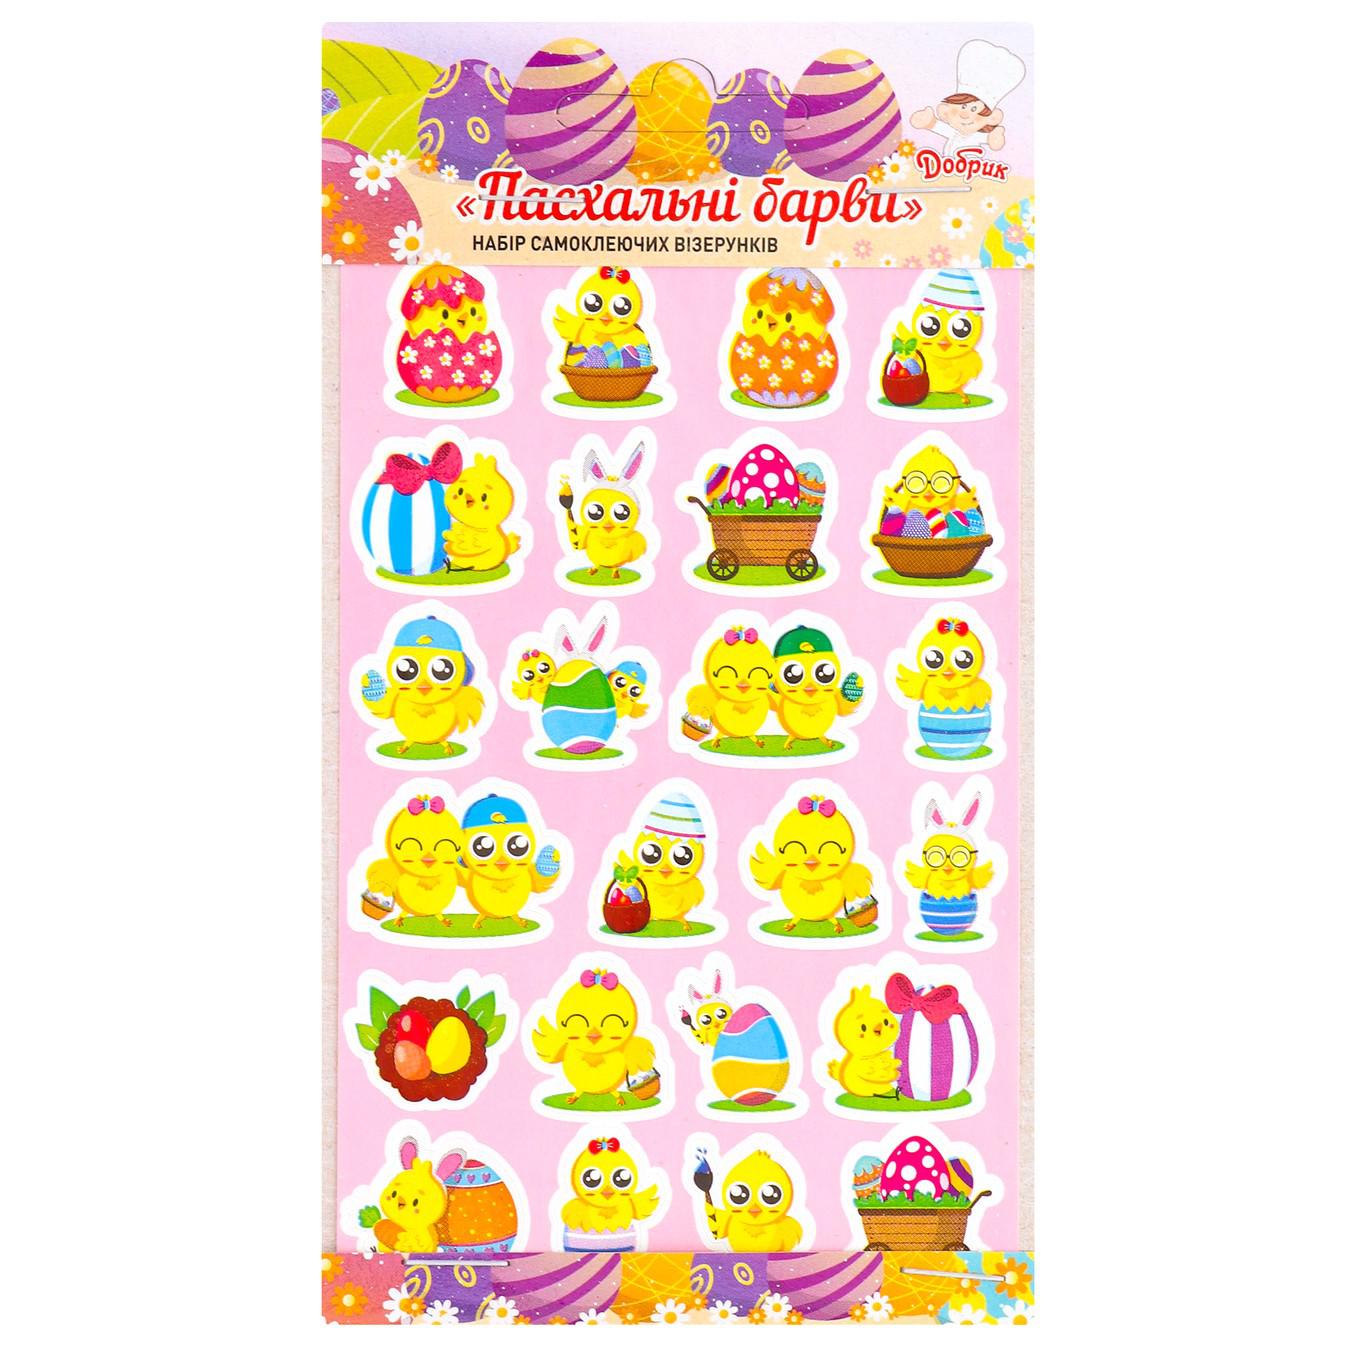 Dobrik A set of self-adhesive patterns Easter colors